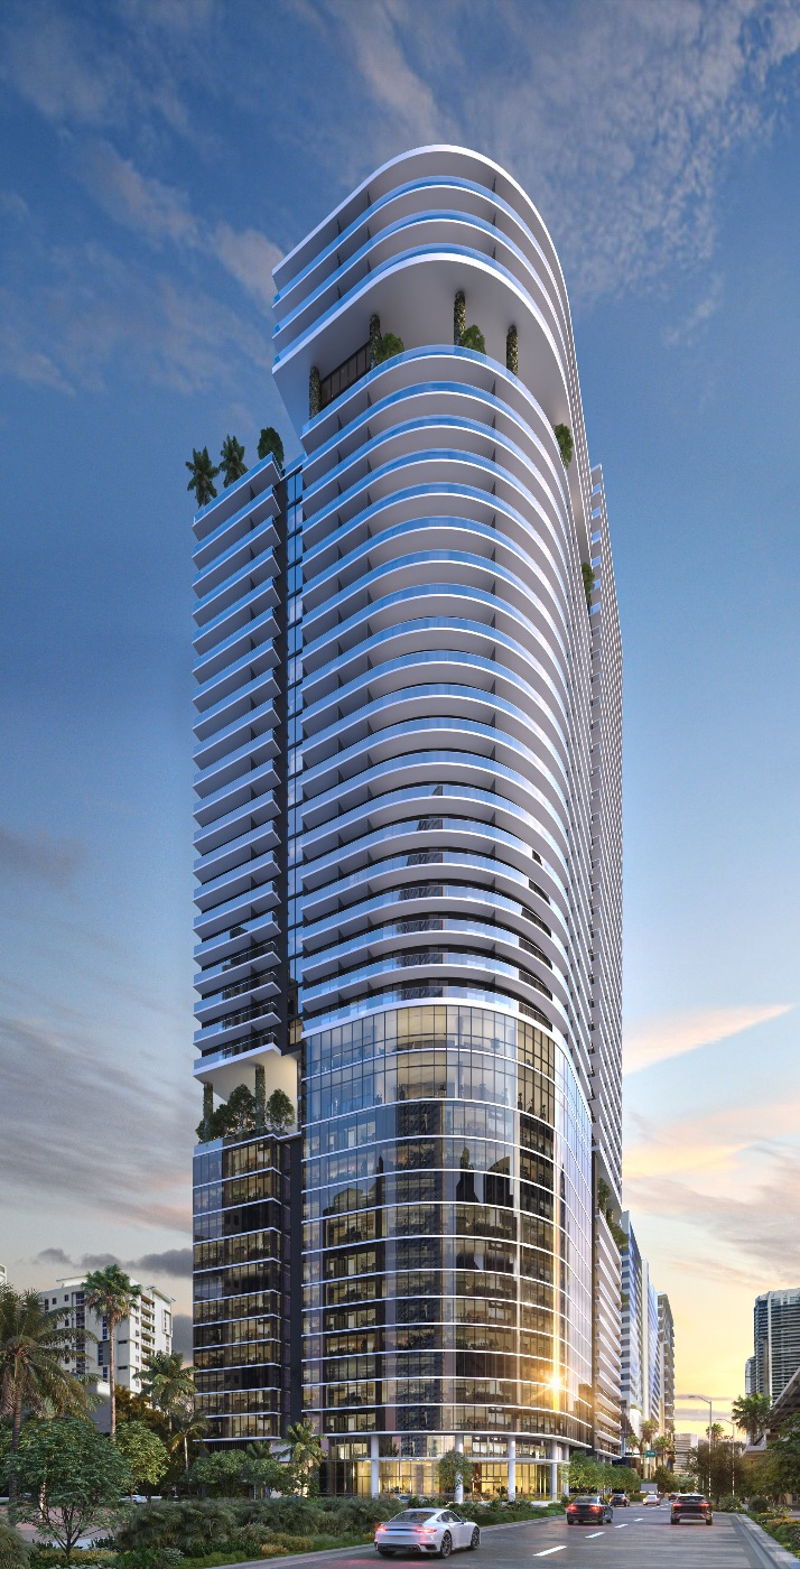 featured image for story, 120 BRICKELL RESIDENCES, A UNIQUE INVESTMENT PROPOSAL IN THE HEART OF BRICKELL